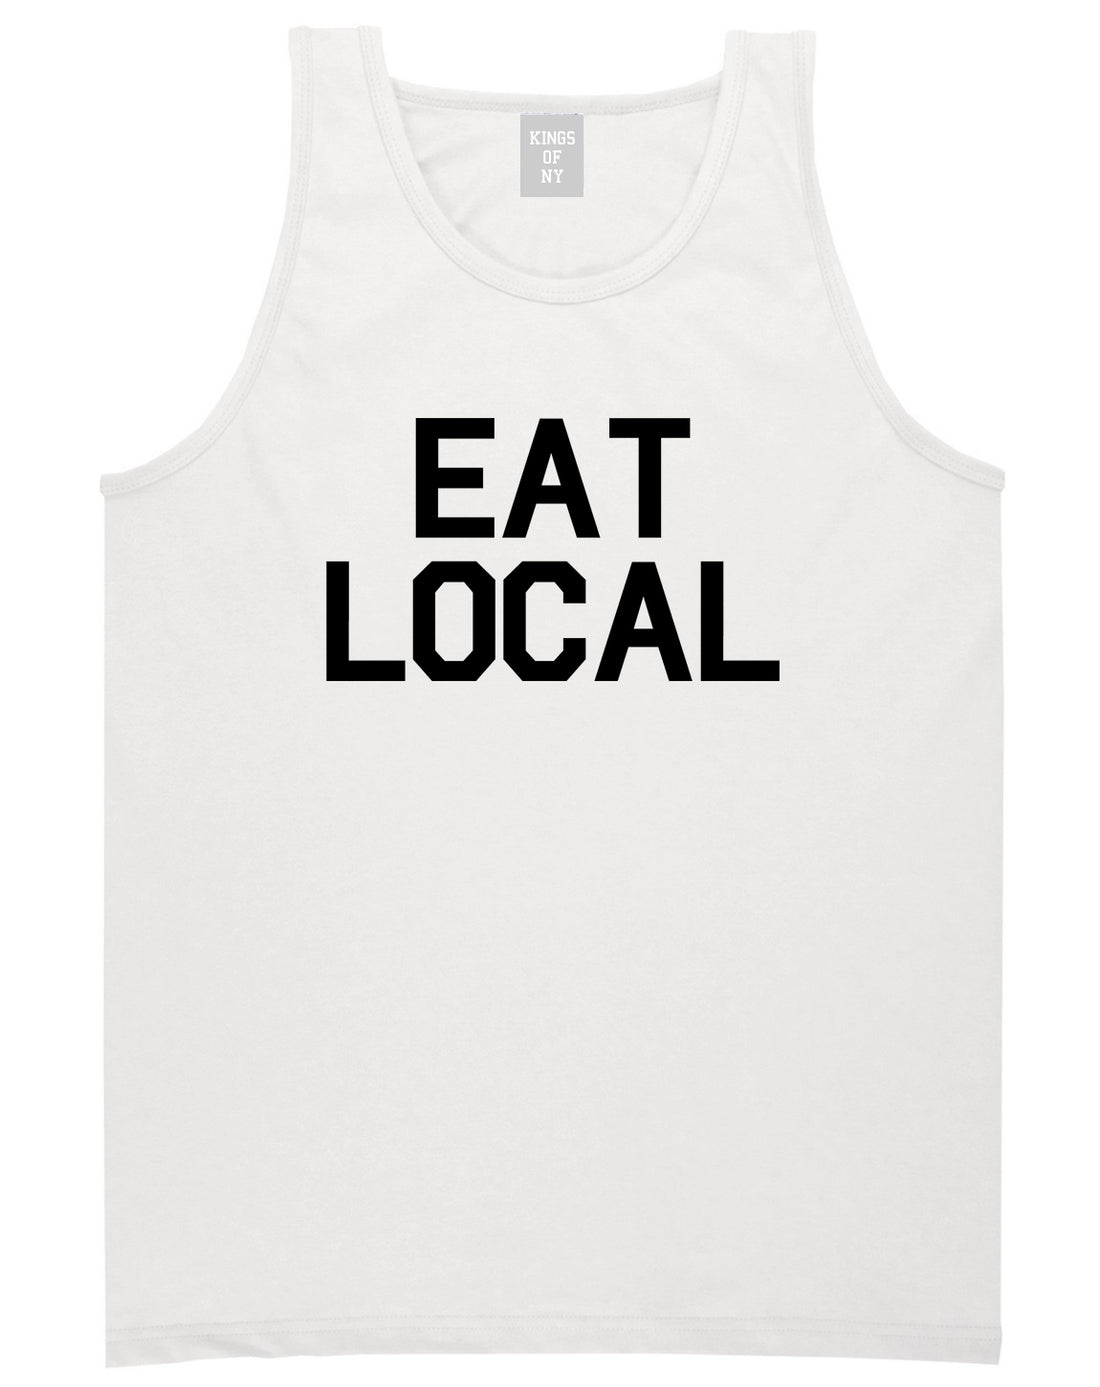 Eat_Local_Buy Mens White Tank Top Shirt by Kings Of NY